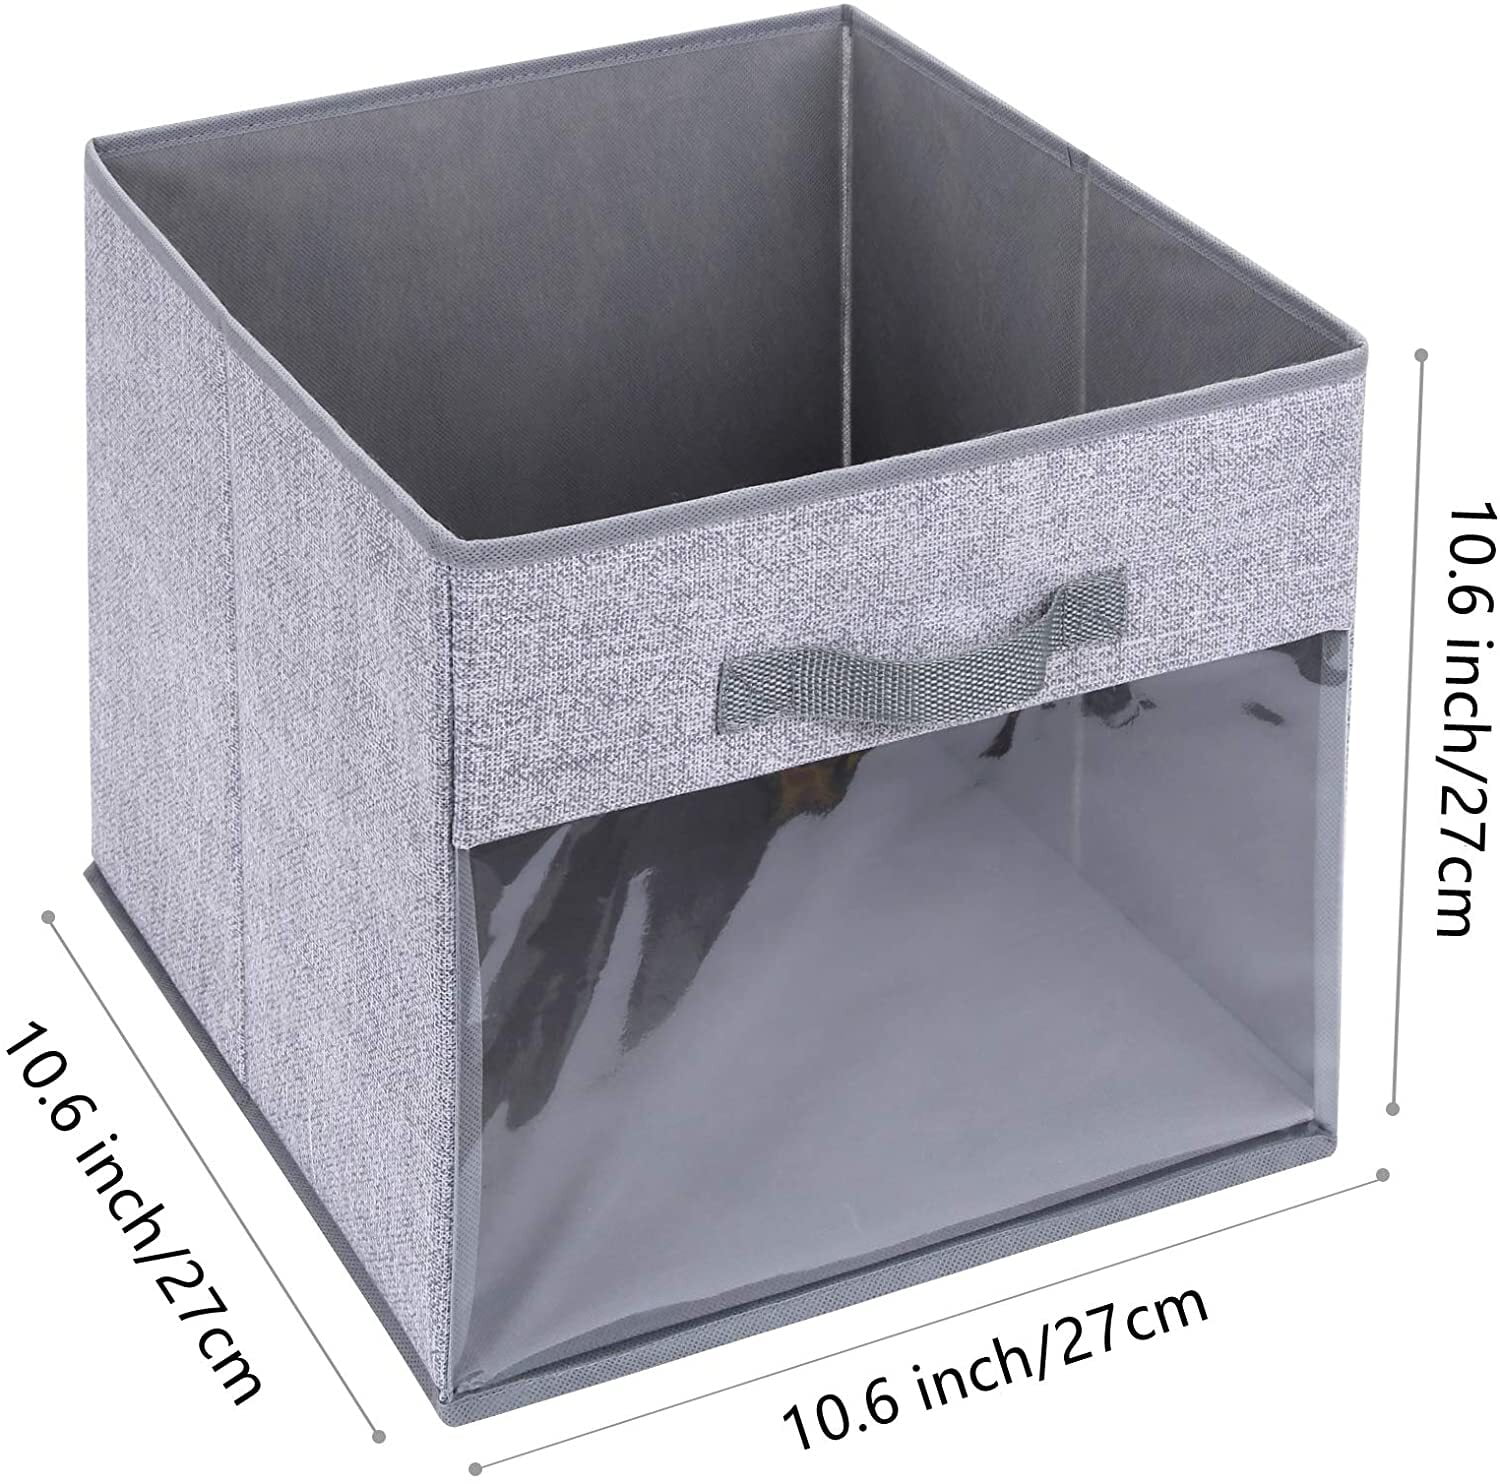 DIMJ Foldable Fabric Wardrobe Storage Bins Set - Stackable, with Handles and Dividers, Size: 16.81 x 11.85 x 1.26, Gray